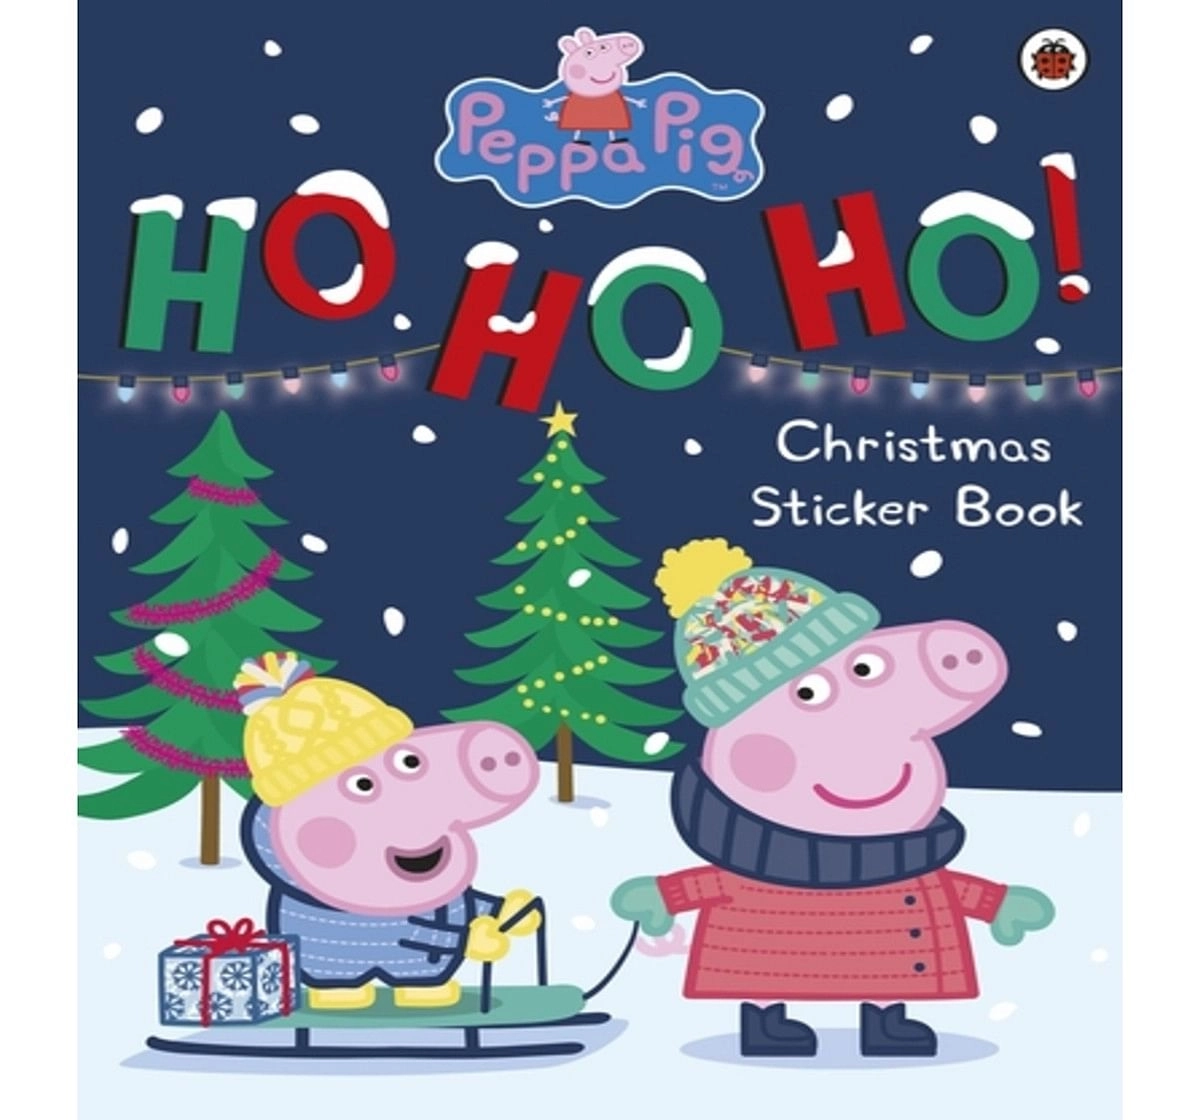 Peppa Pig: Ho Ho Ho! Christmas Sticker B, 24 Pages Book by Ladybird, Paperback